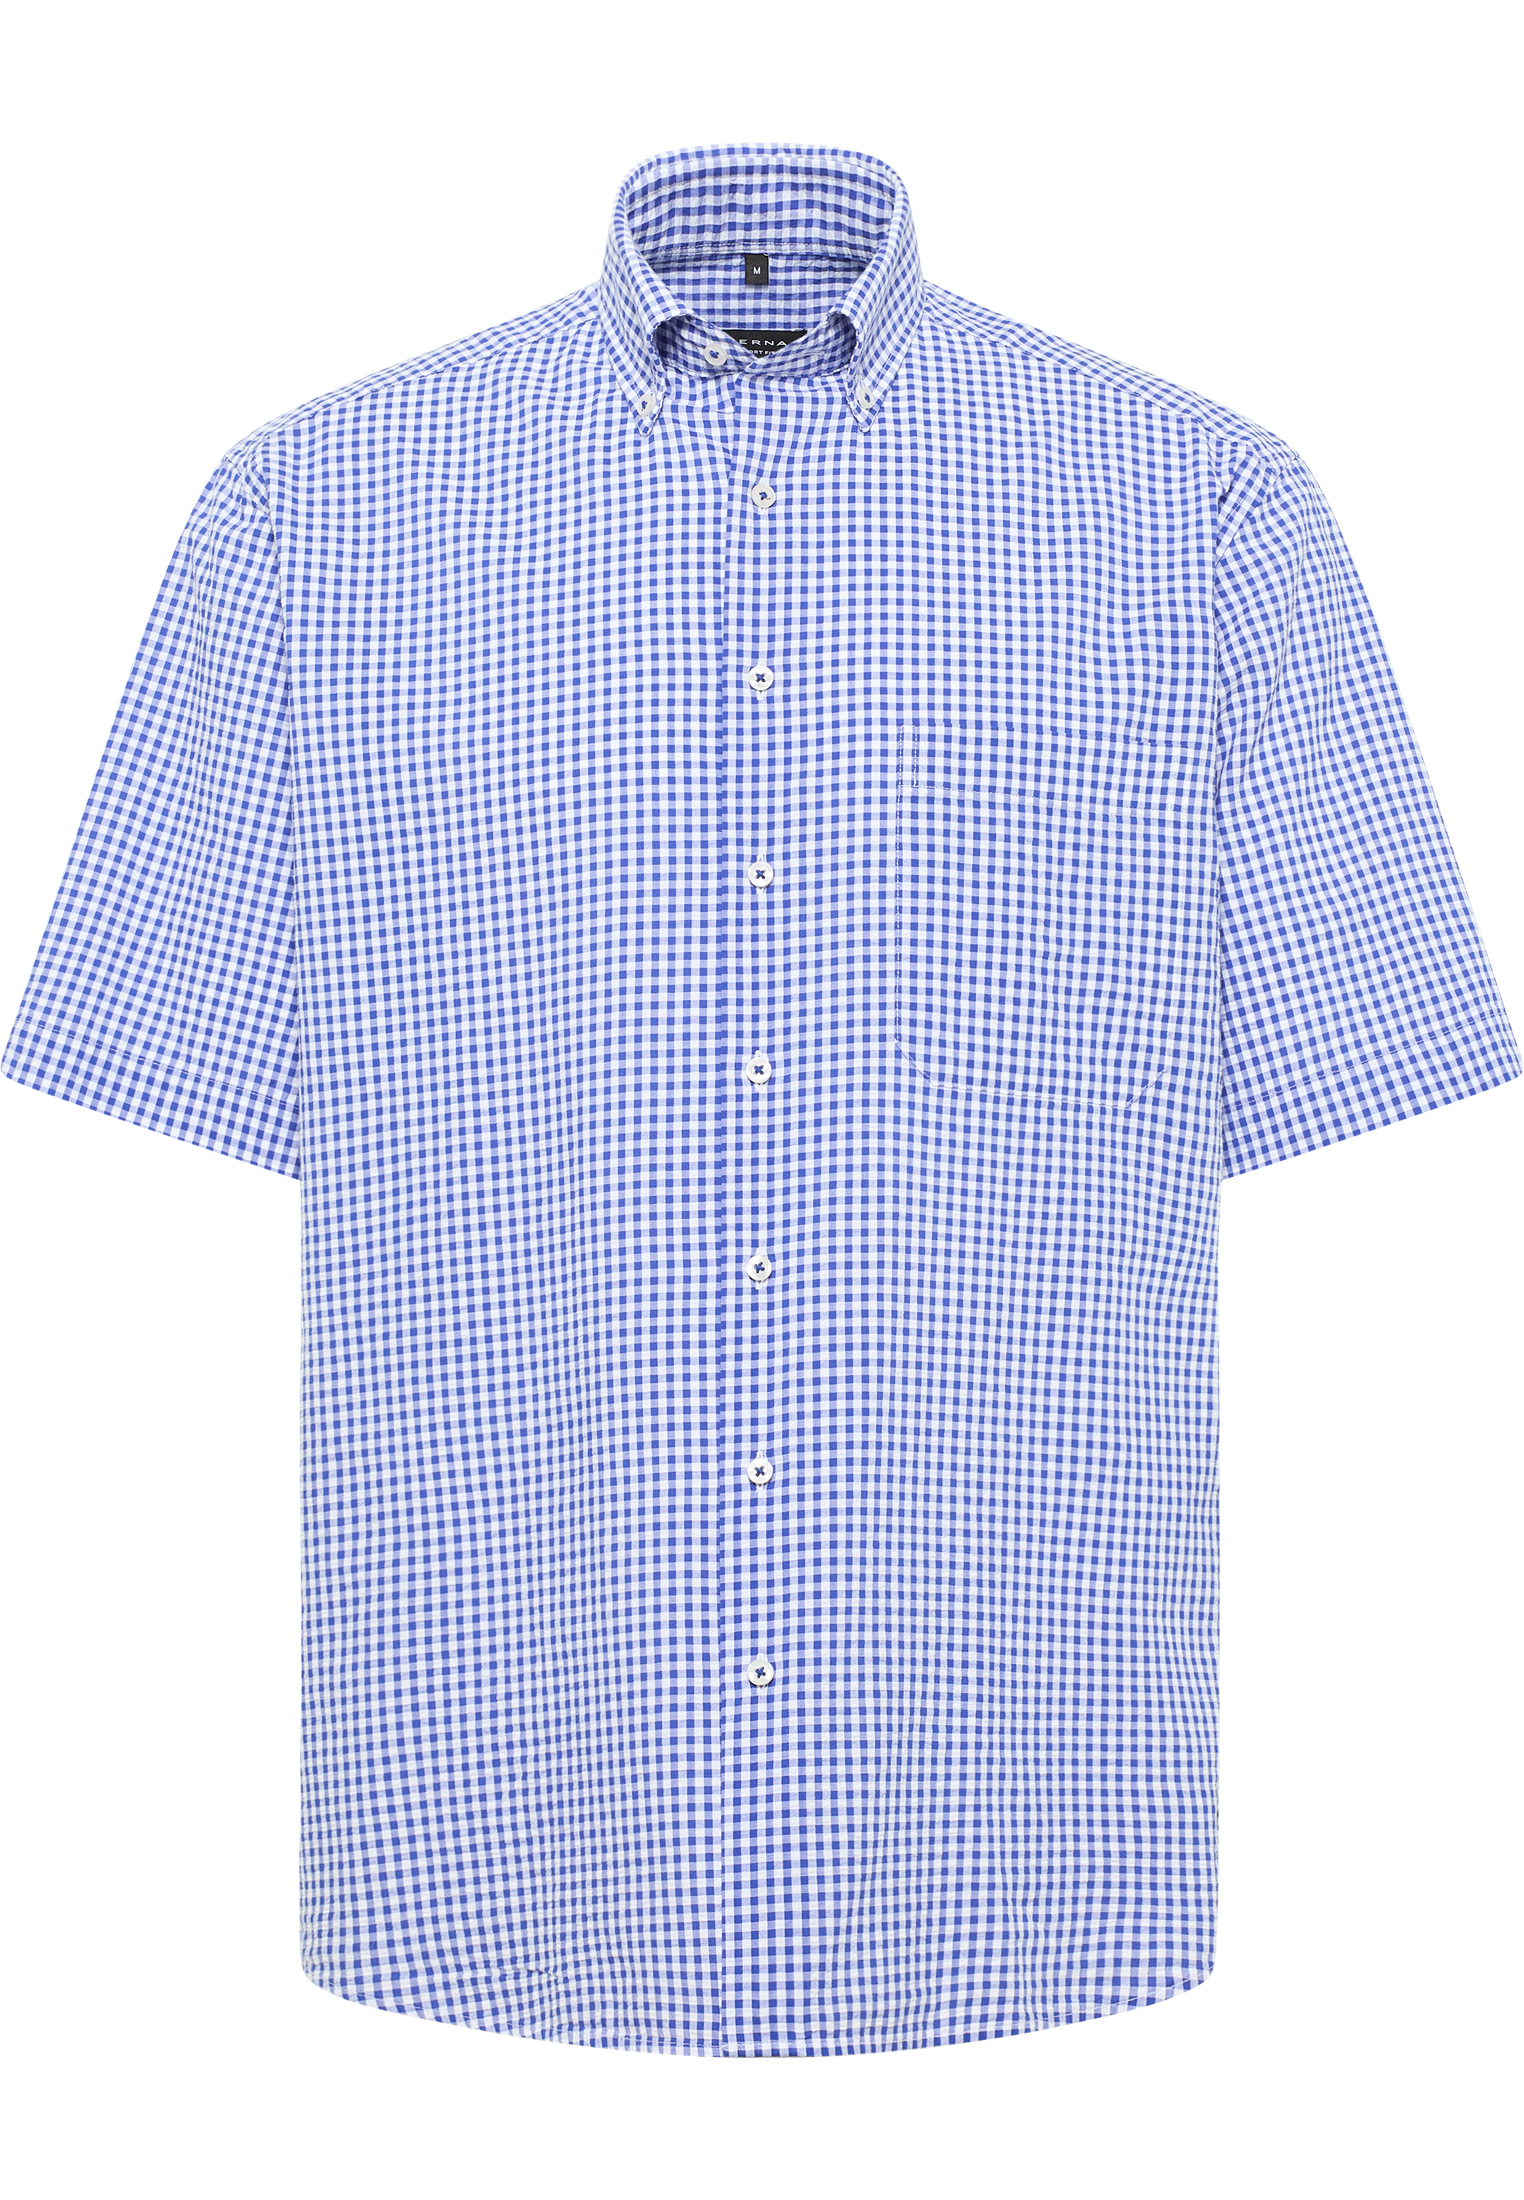 COMFORT FIT Shirt in blue checkered